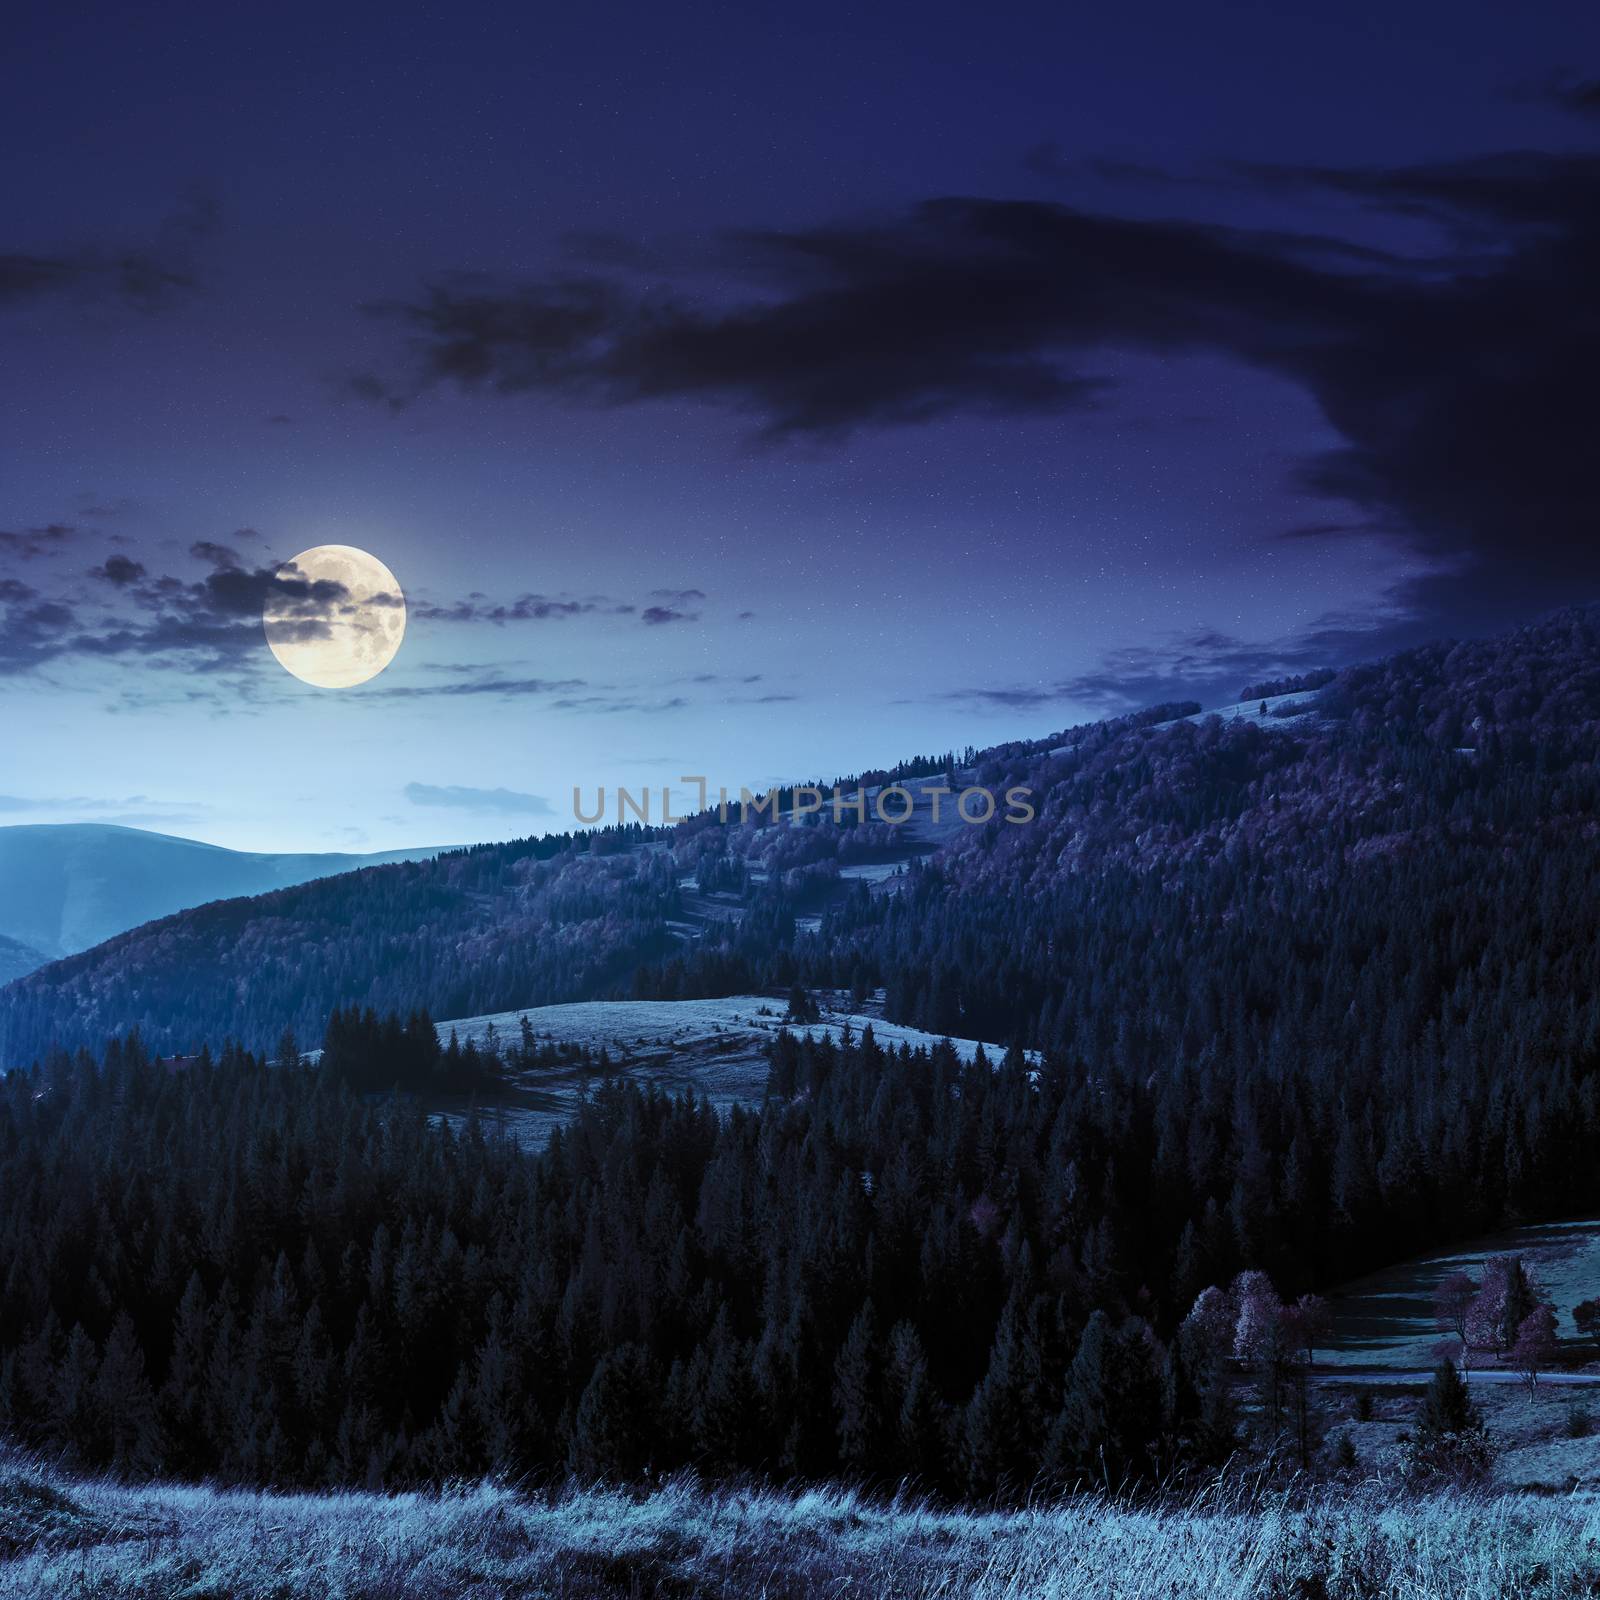 hill of mountain range with fir forest in autumn at night in full moon light